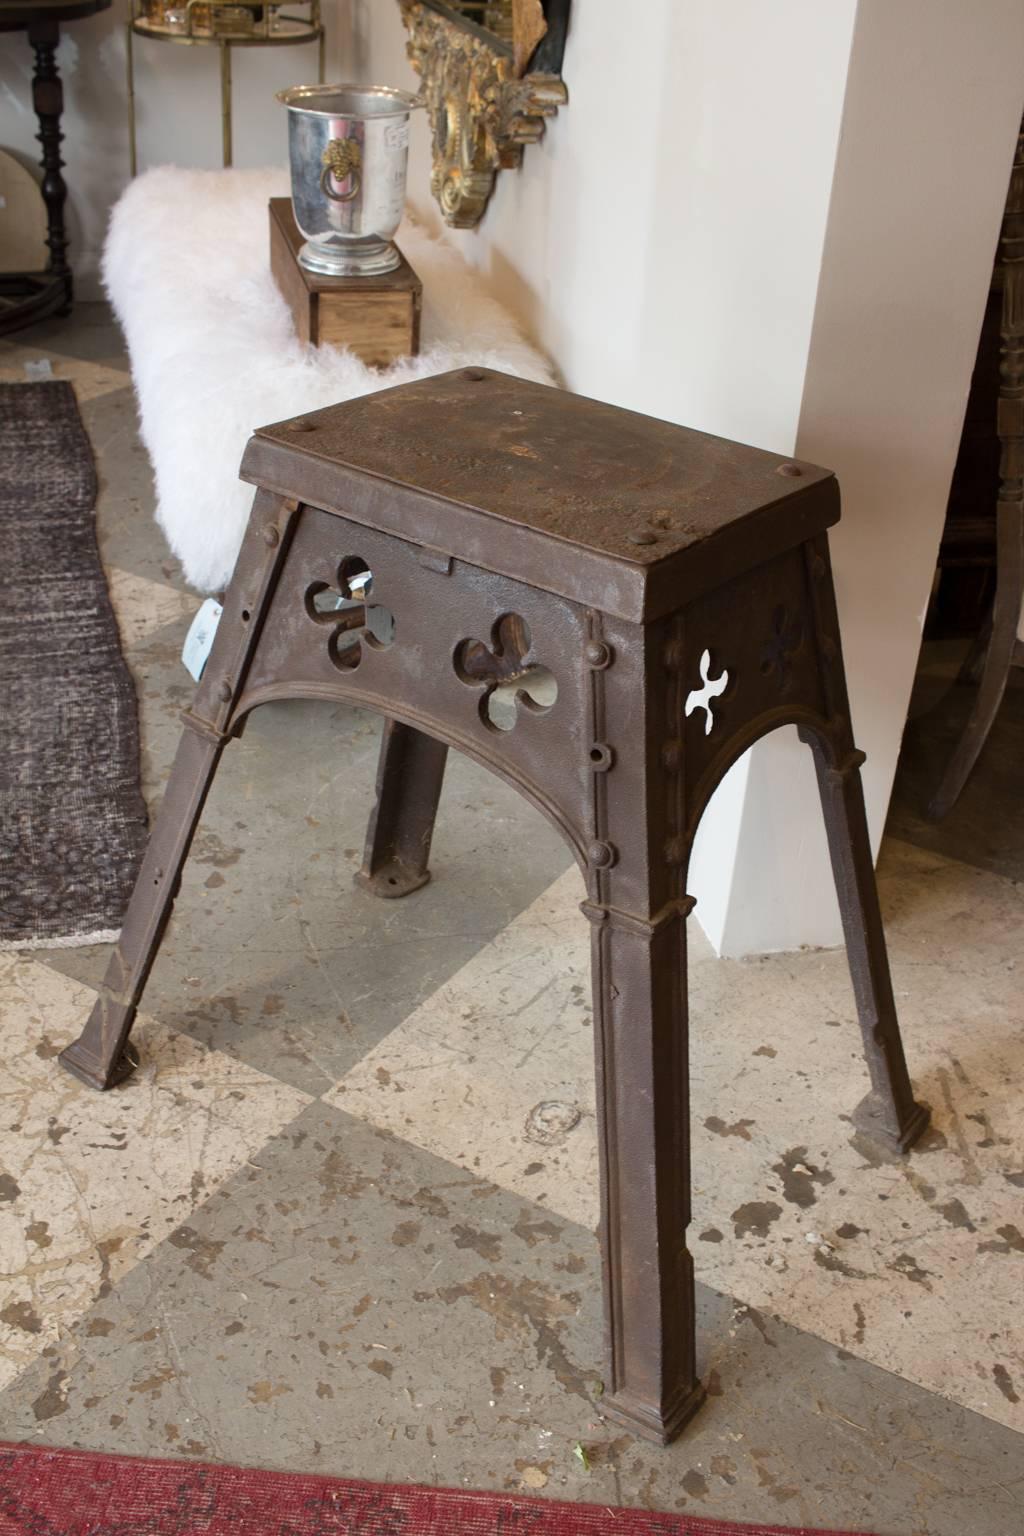 This is a solid iron Gothic table we found on our most recent trip to France. The piece features pierced clover-shaped details and a wide, a-frame base. The piece measures 30.25